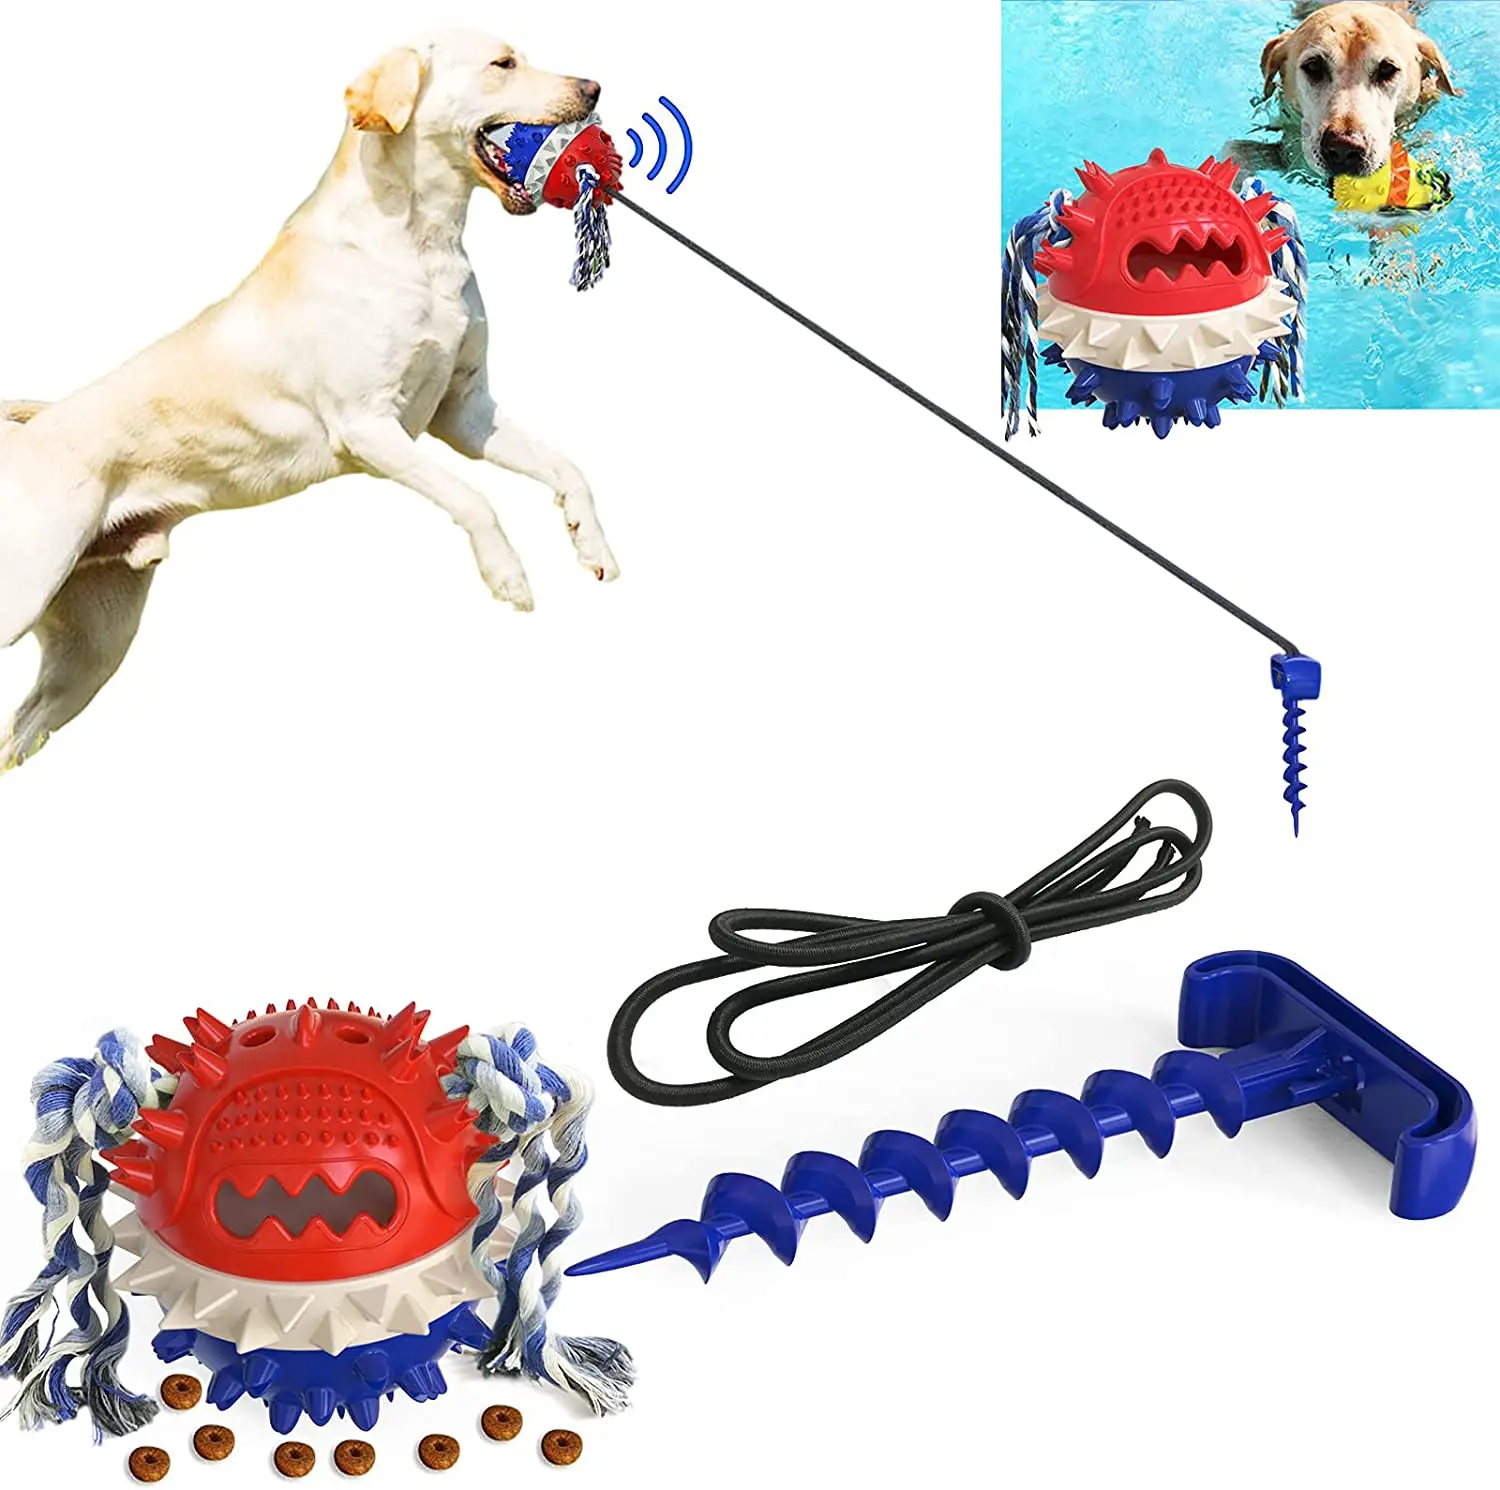 

Dog Molar Teething Toy Bite Resistant Elastic Pet Sounding Ball Toy Outdoor Strong Teeth Training Pulling Ball Tug-of-war Toy